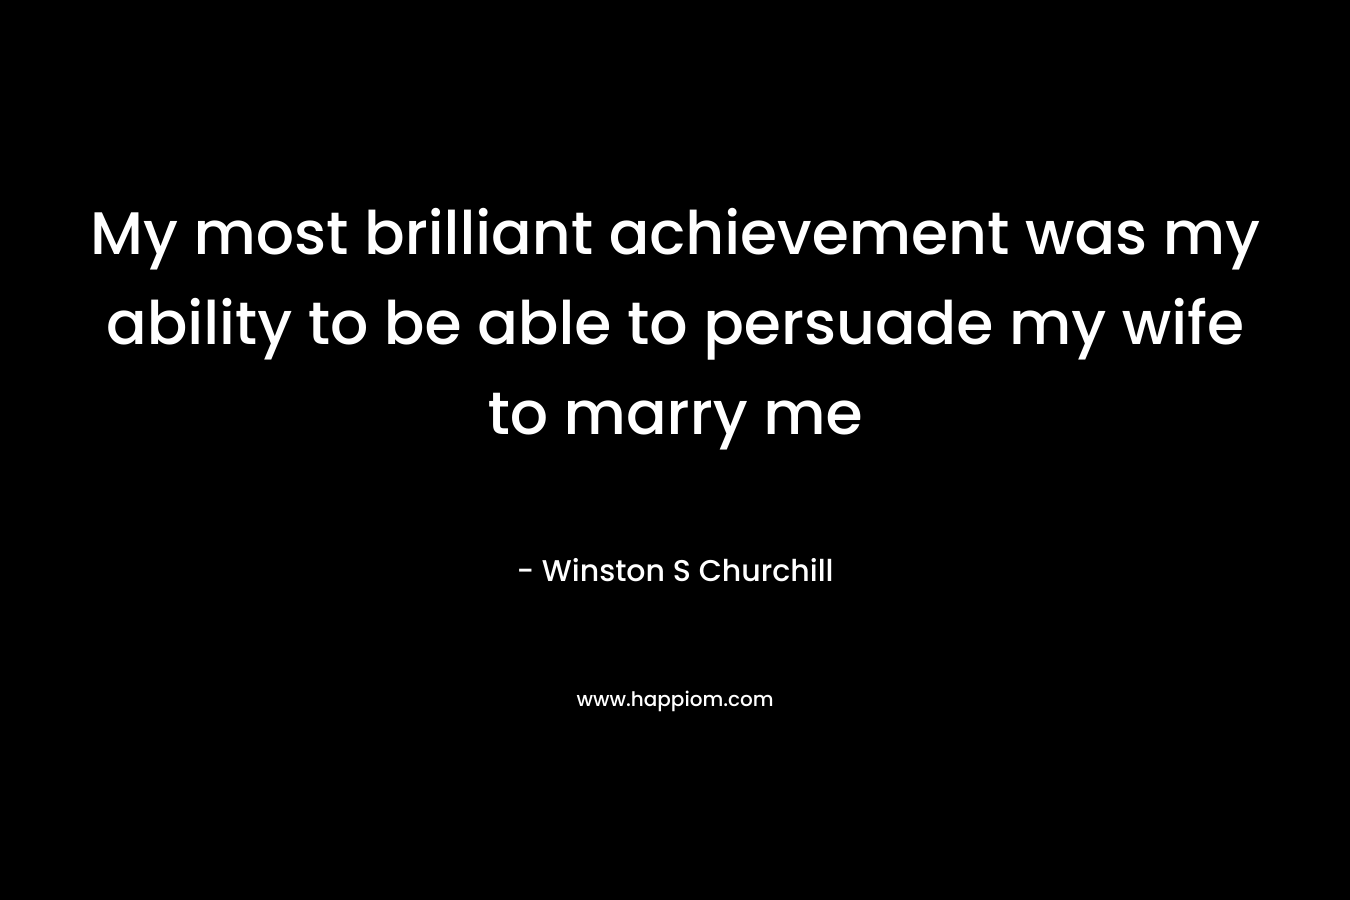 My most brilliant achievement was my ability to be able to persuade my wife to marry me – Winston S Churchill